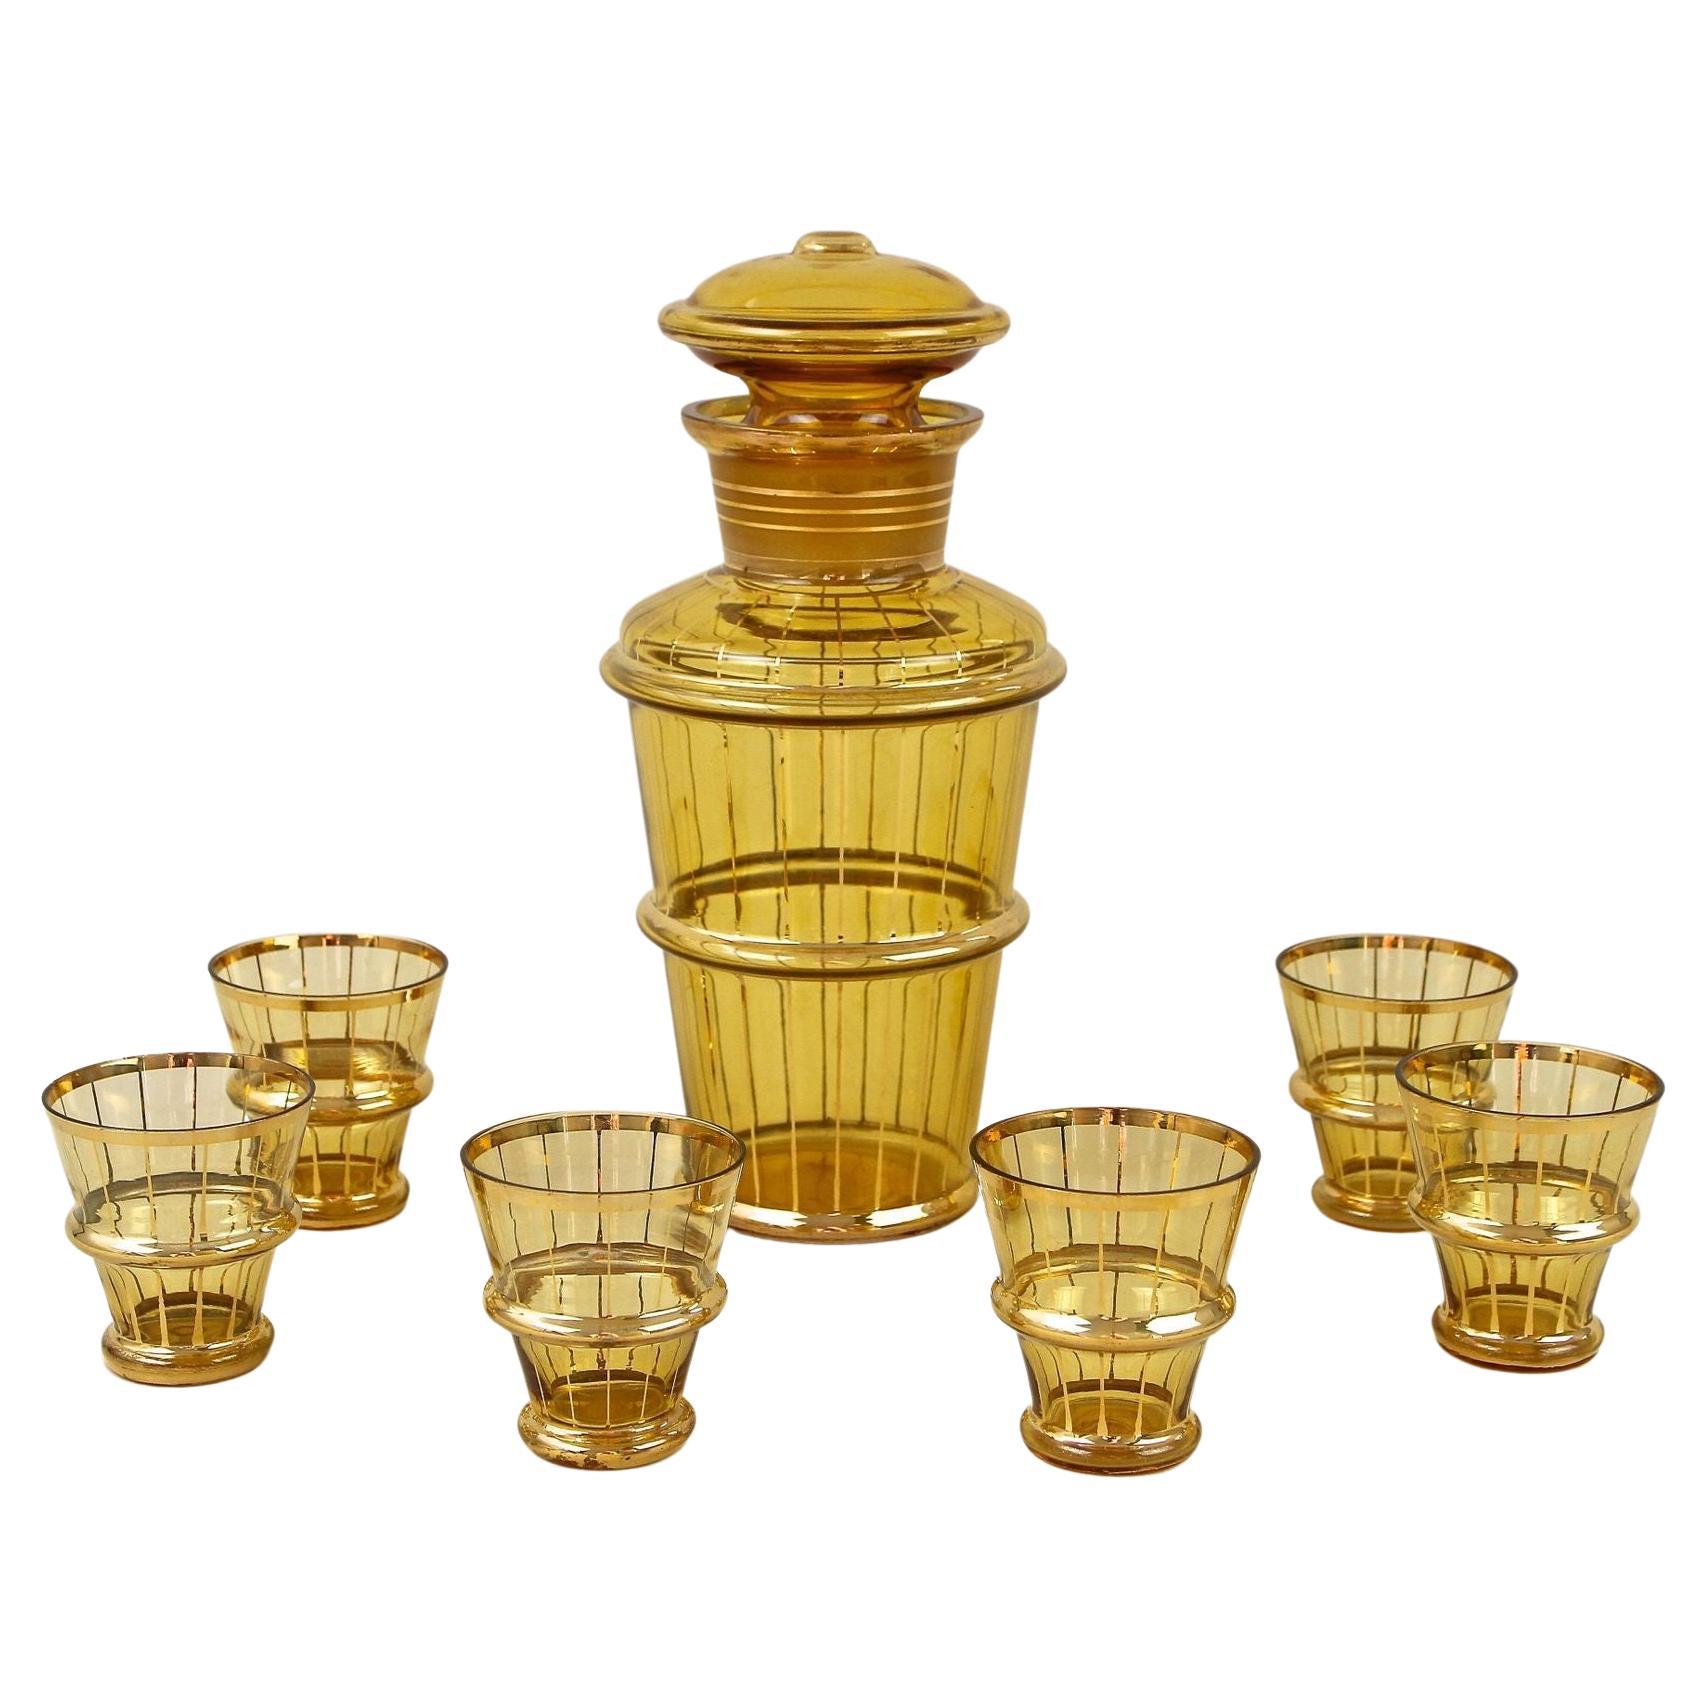 Amber Colored Gilt Art Deco Glass Decanter Set with 6 Shot Glasses, CZ ca. 1920 For Sale